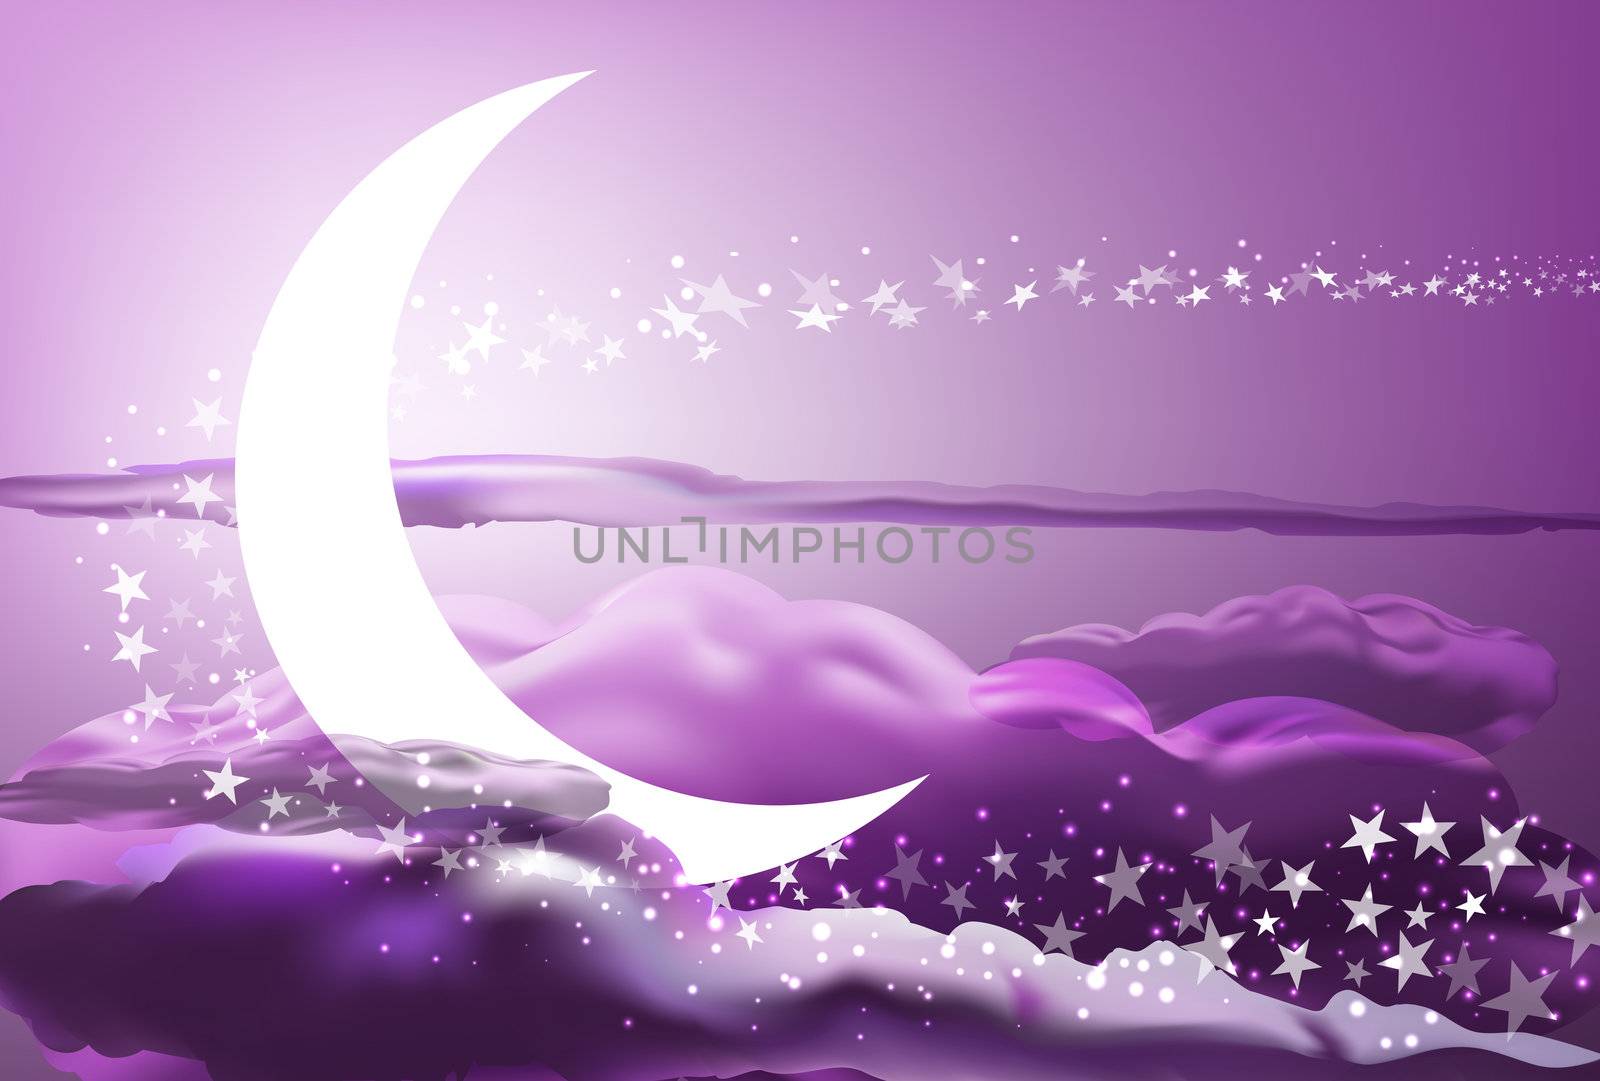 vector romantic scene with moon, stars and pink clouds, eps 10 file, gradient mesh and transparency used